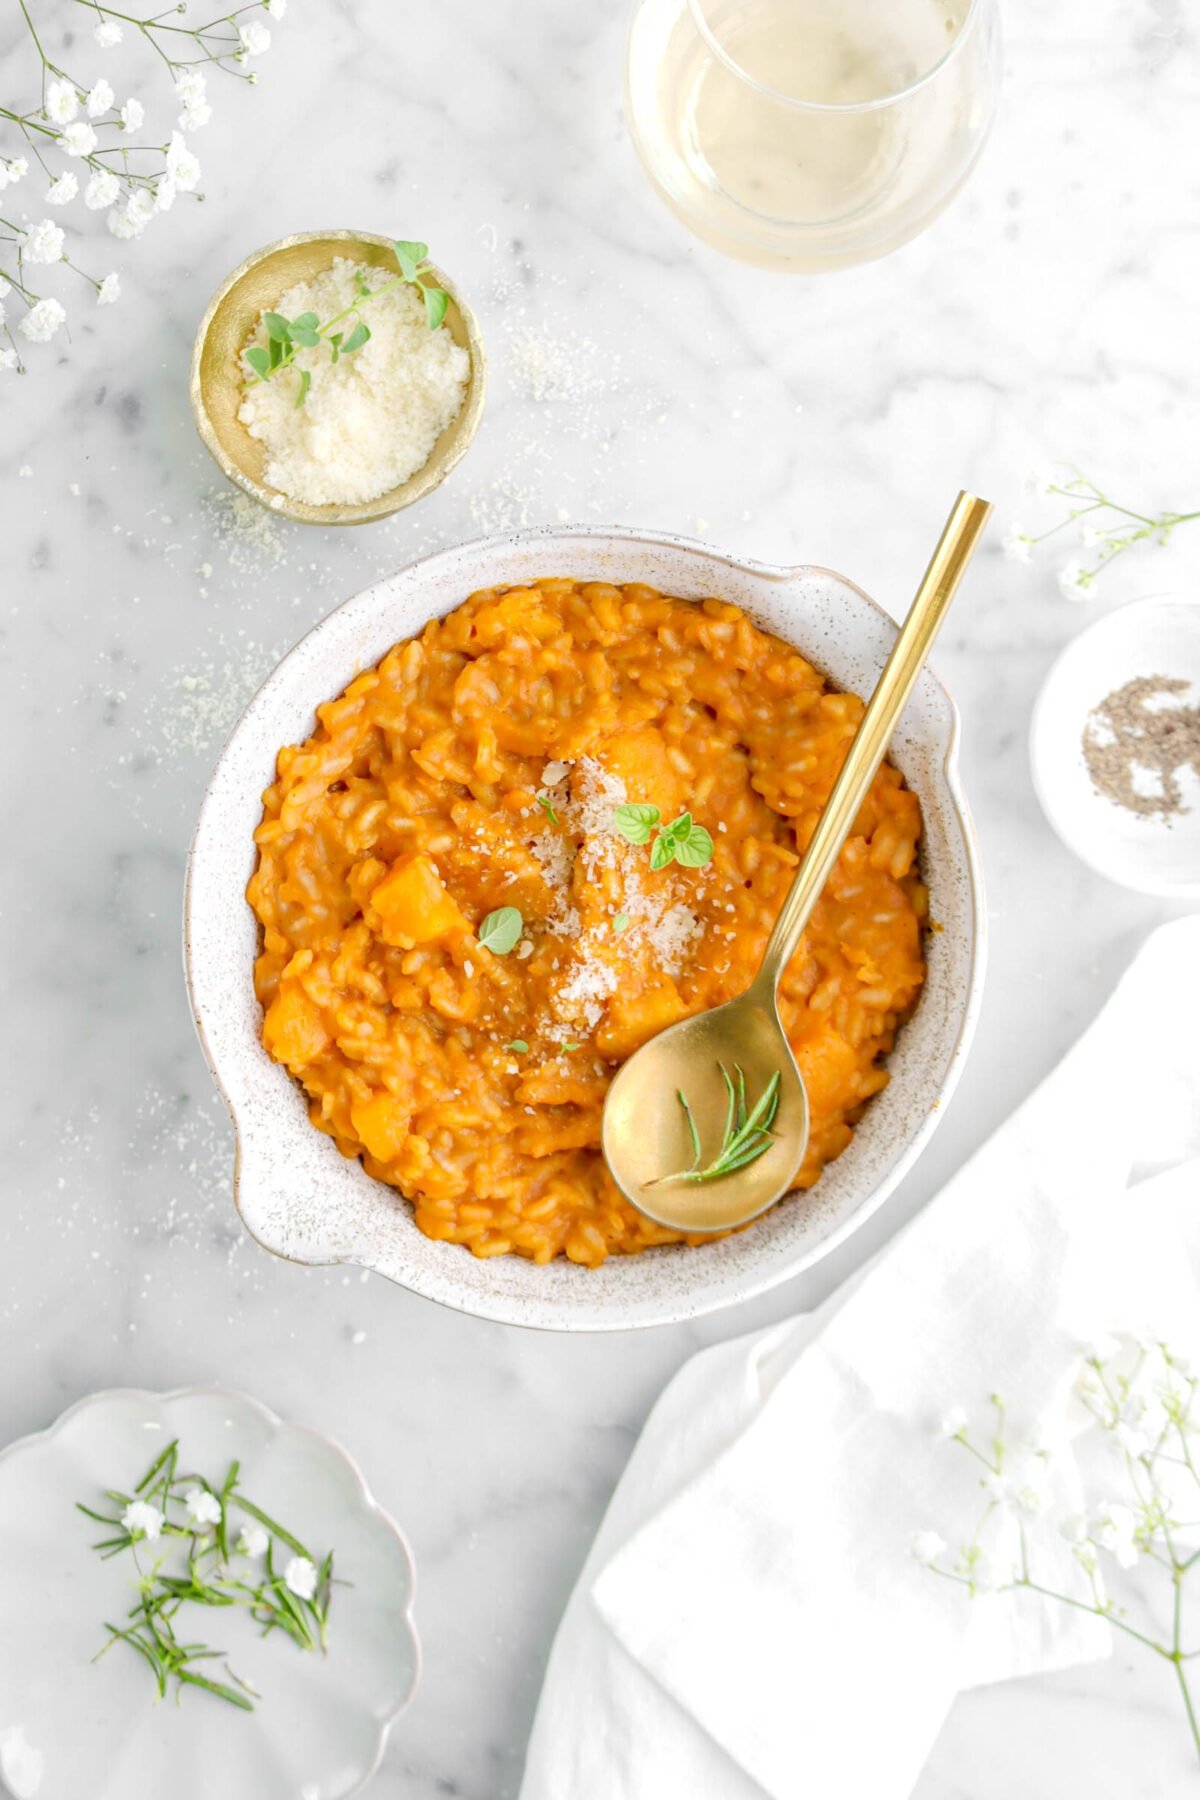 butternut squash risotto in bowl with gold spoon on top, a bowl of grated cheese beside, a glass of wine, and white napkin.